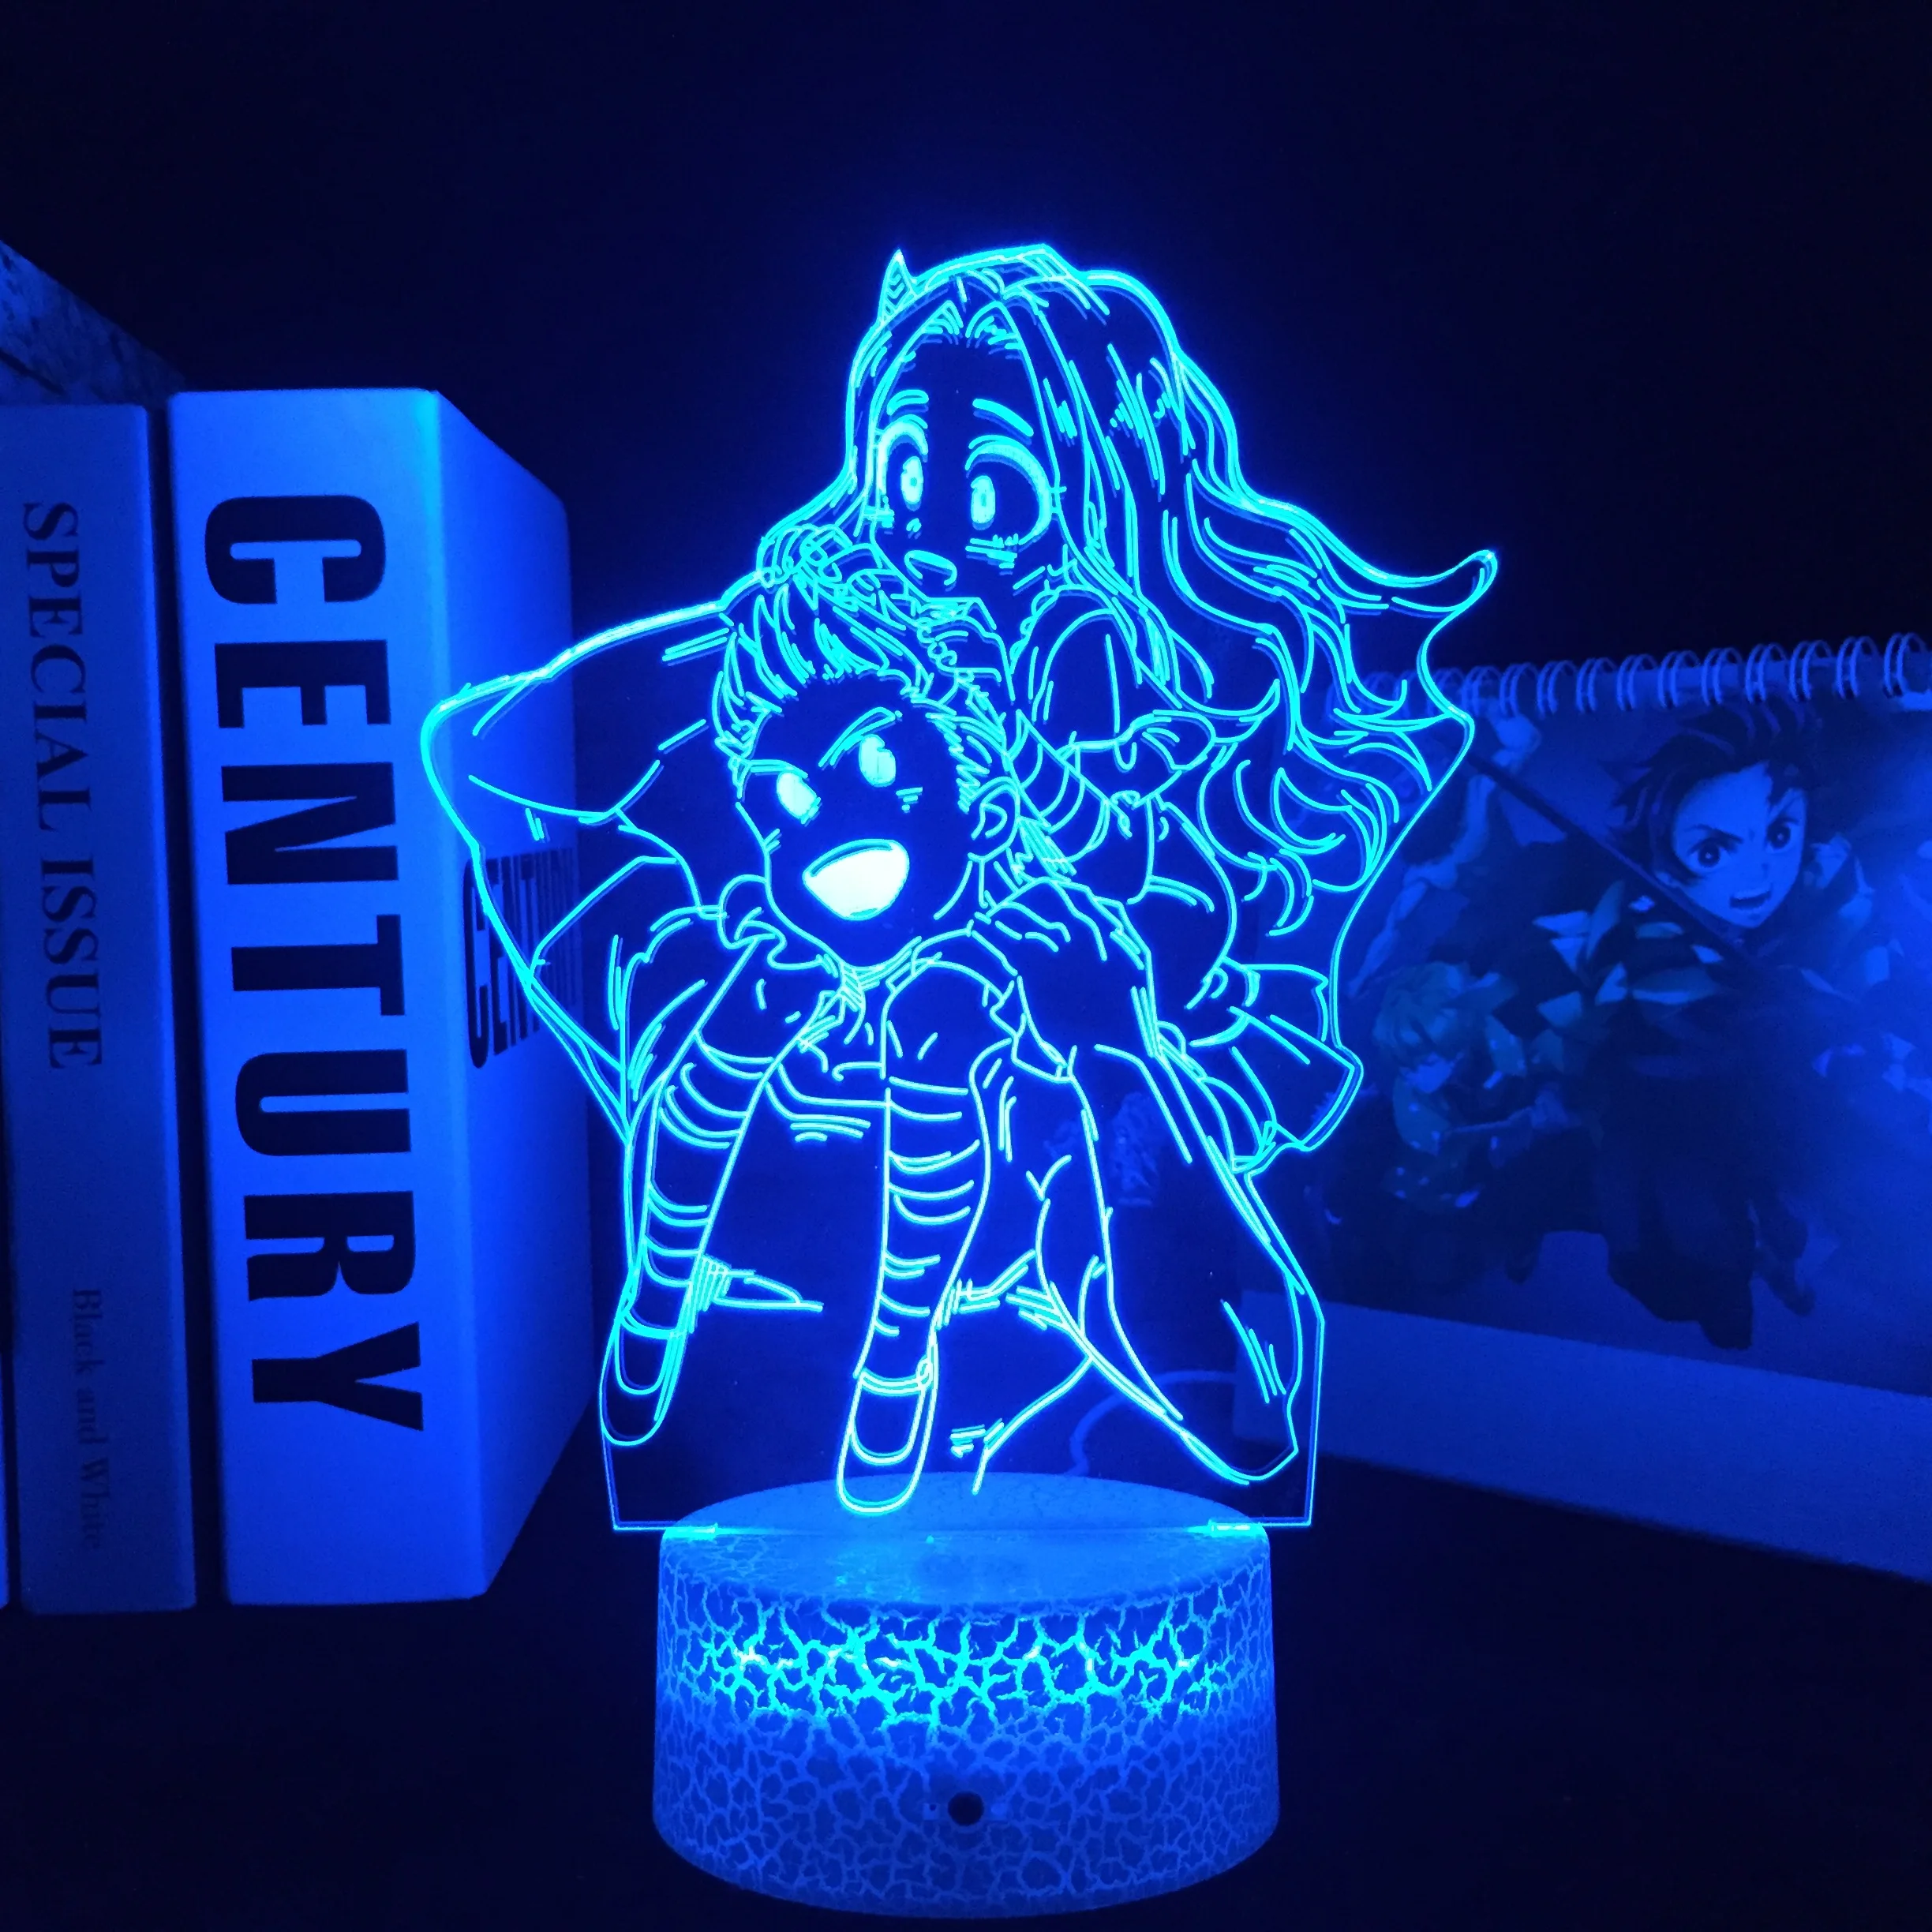 

Million And Eri Lamp for Bedroom Decoration Birthday Gift LED Night Light My Hero Academia 3D Lamp Anime Academia Dropshipping